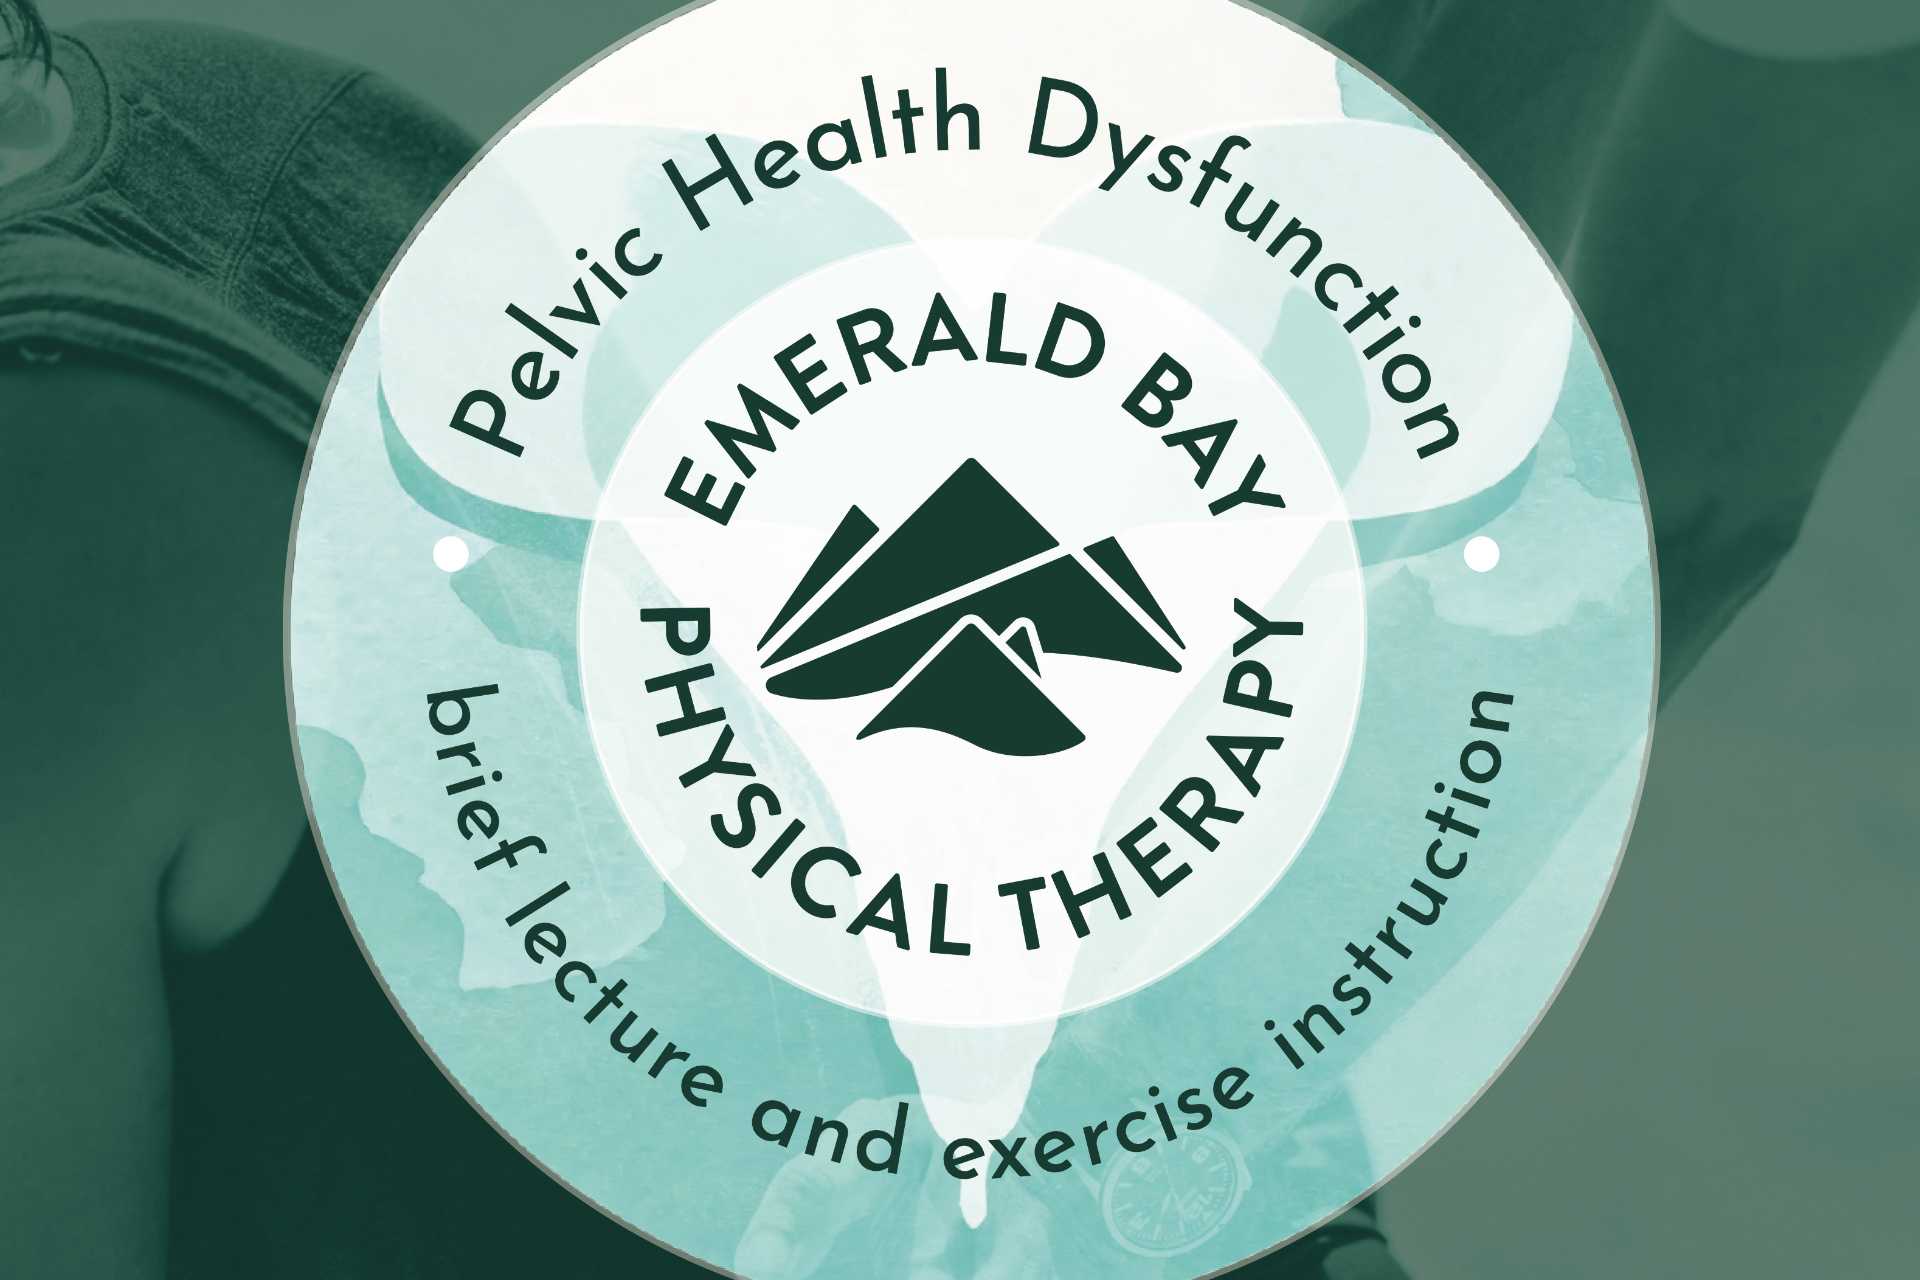 Pelvic Health Dysfunction Brief lecture and exercise instruction event from emerald bay physical therapy